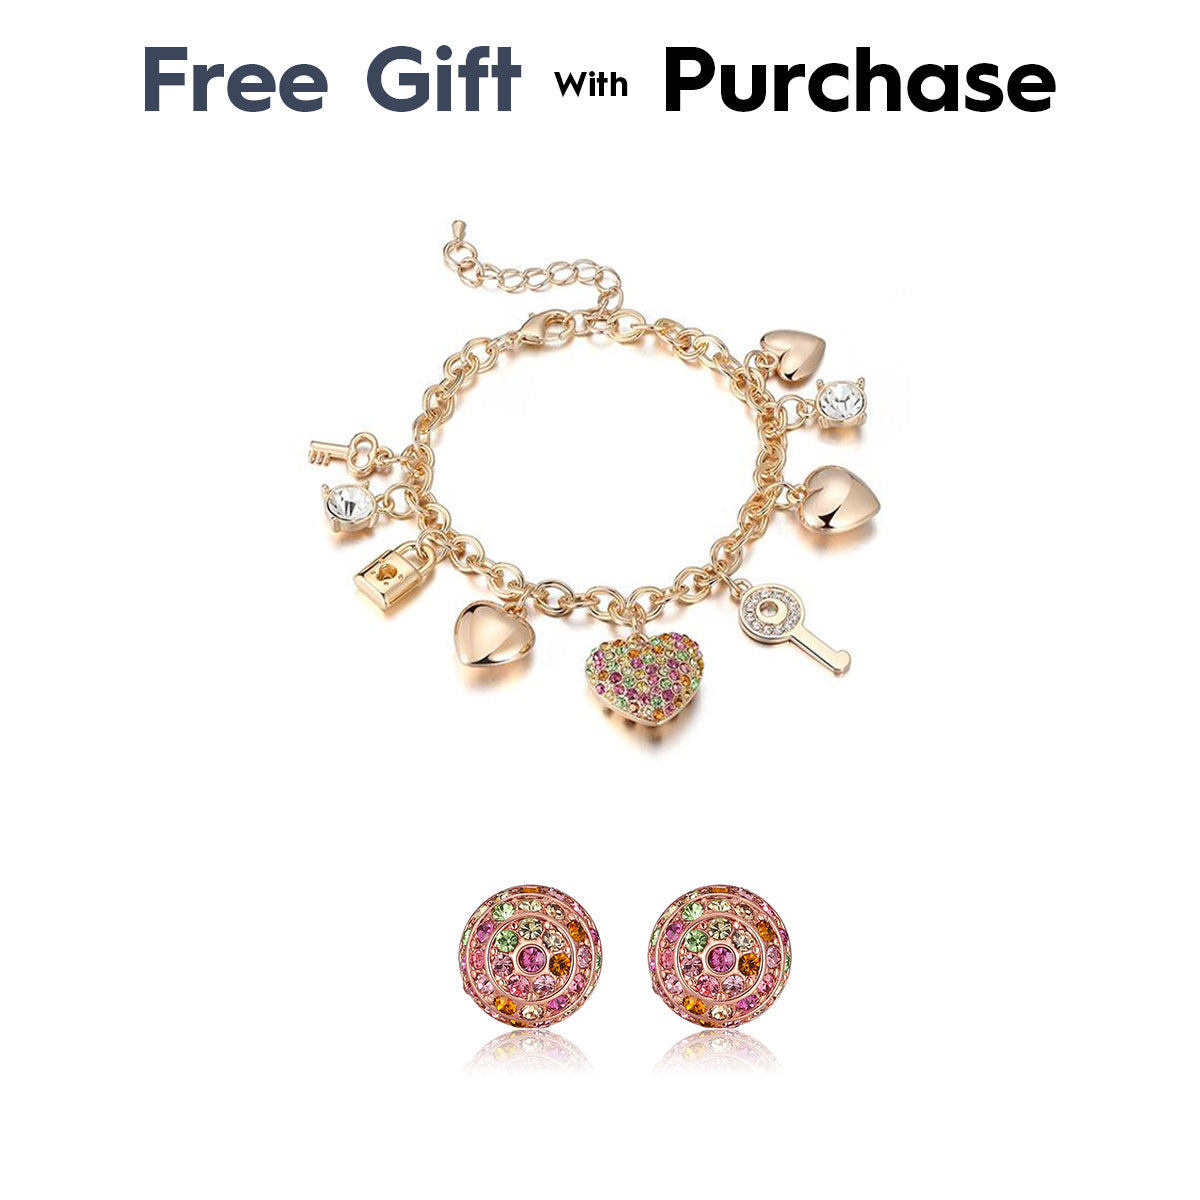 FREE GIFT WITH PURCHASE - Tropic Crystal Charm Bracelet + Tropic Crystal Stud Earrings